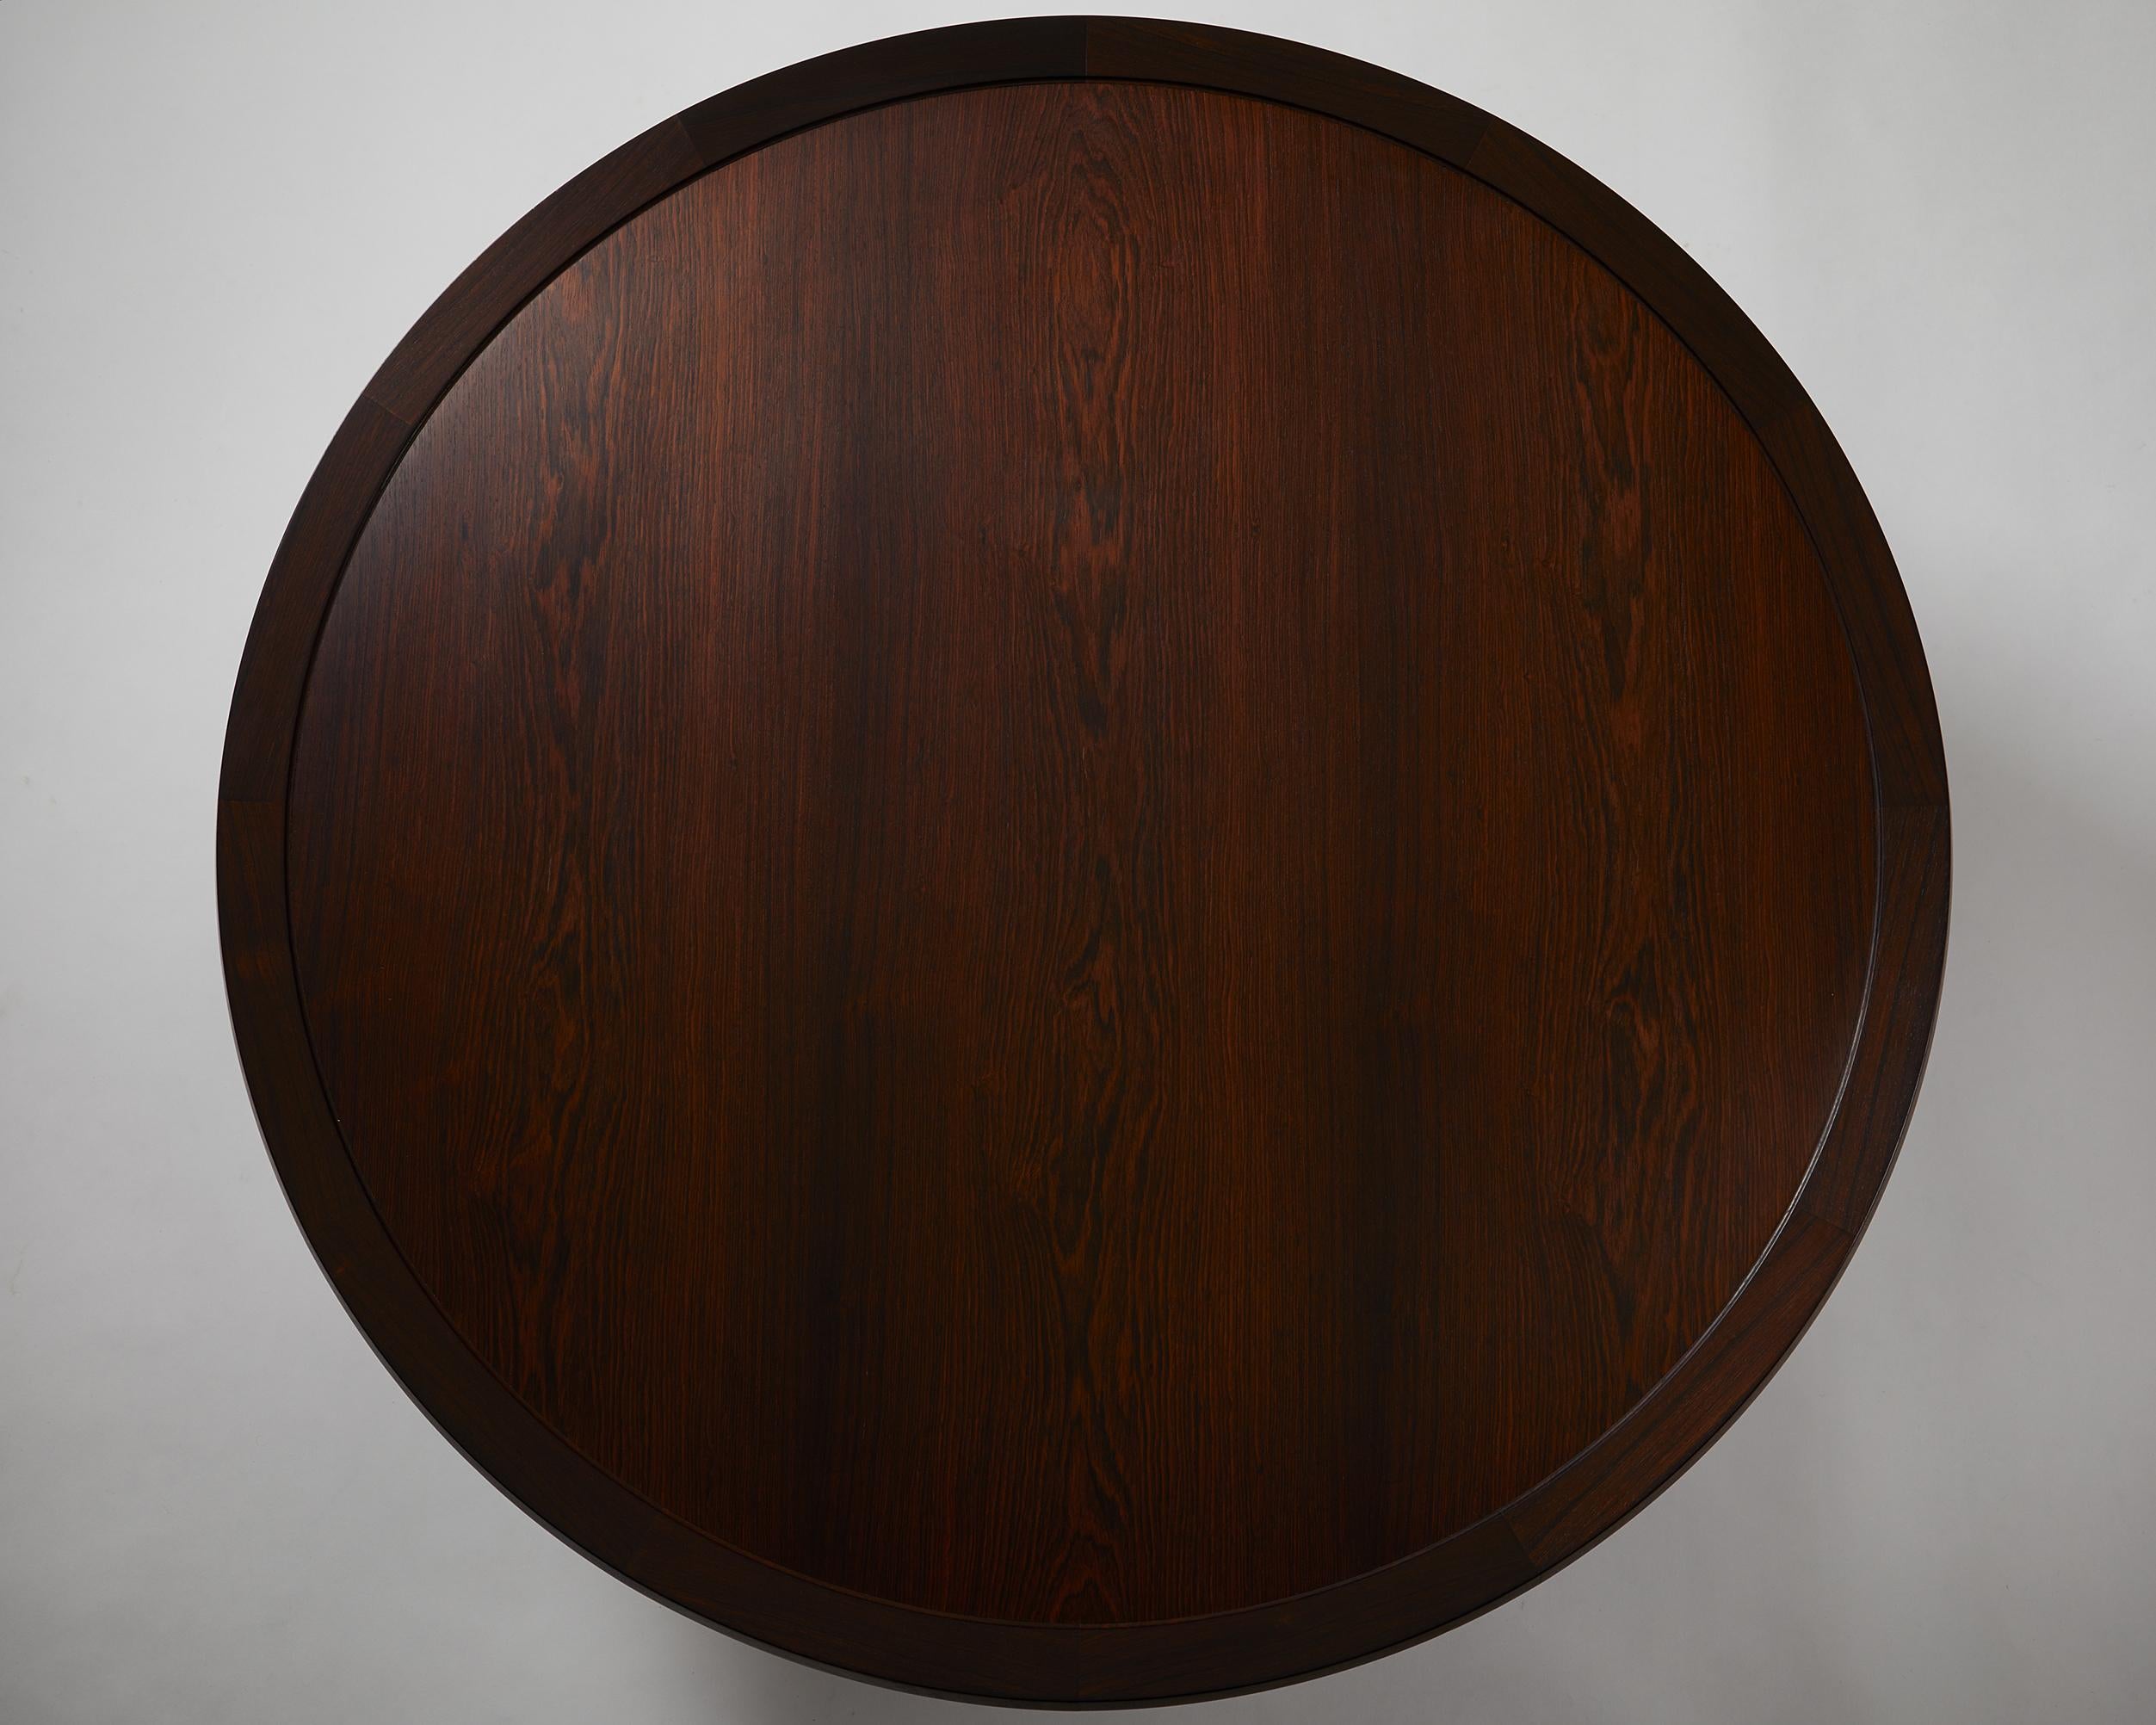 Mid-Century Modern Occasional Table Designed by Frits Schlegel, Rosewood and Brass, Denmark, 1949 For Sale